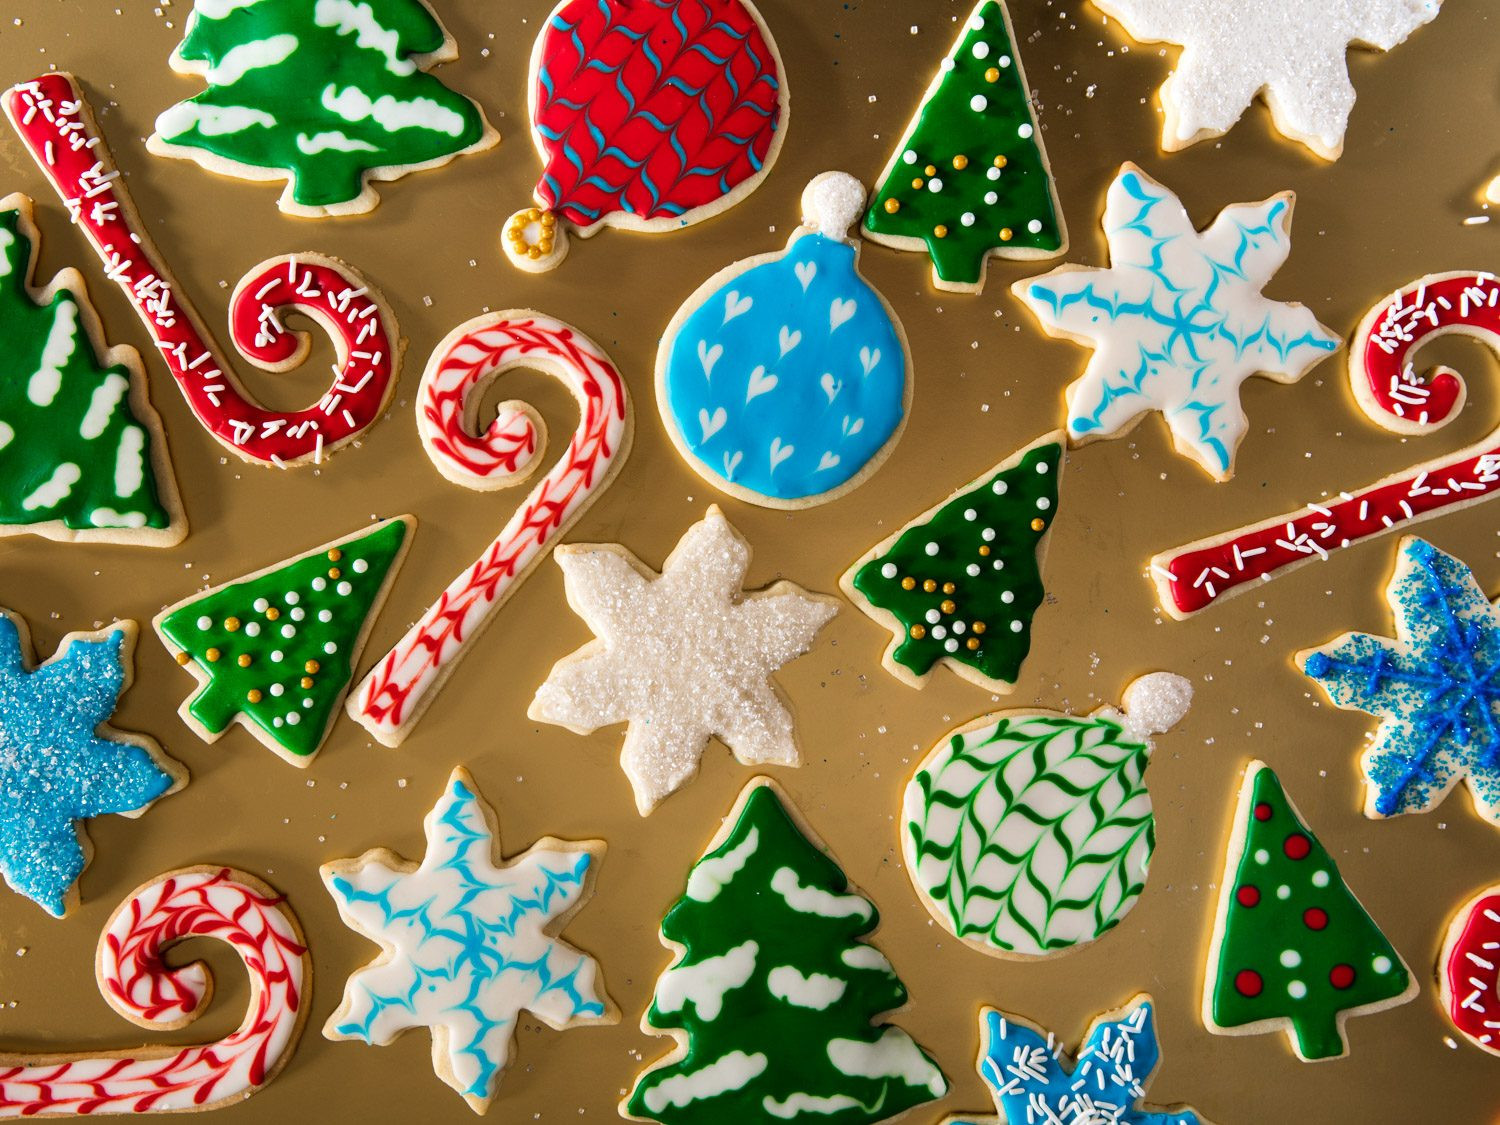 Pictures Of Christmas Cookies Decorated
 A Royal Icing Tutorial Decorate Christmas Cookies Like a